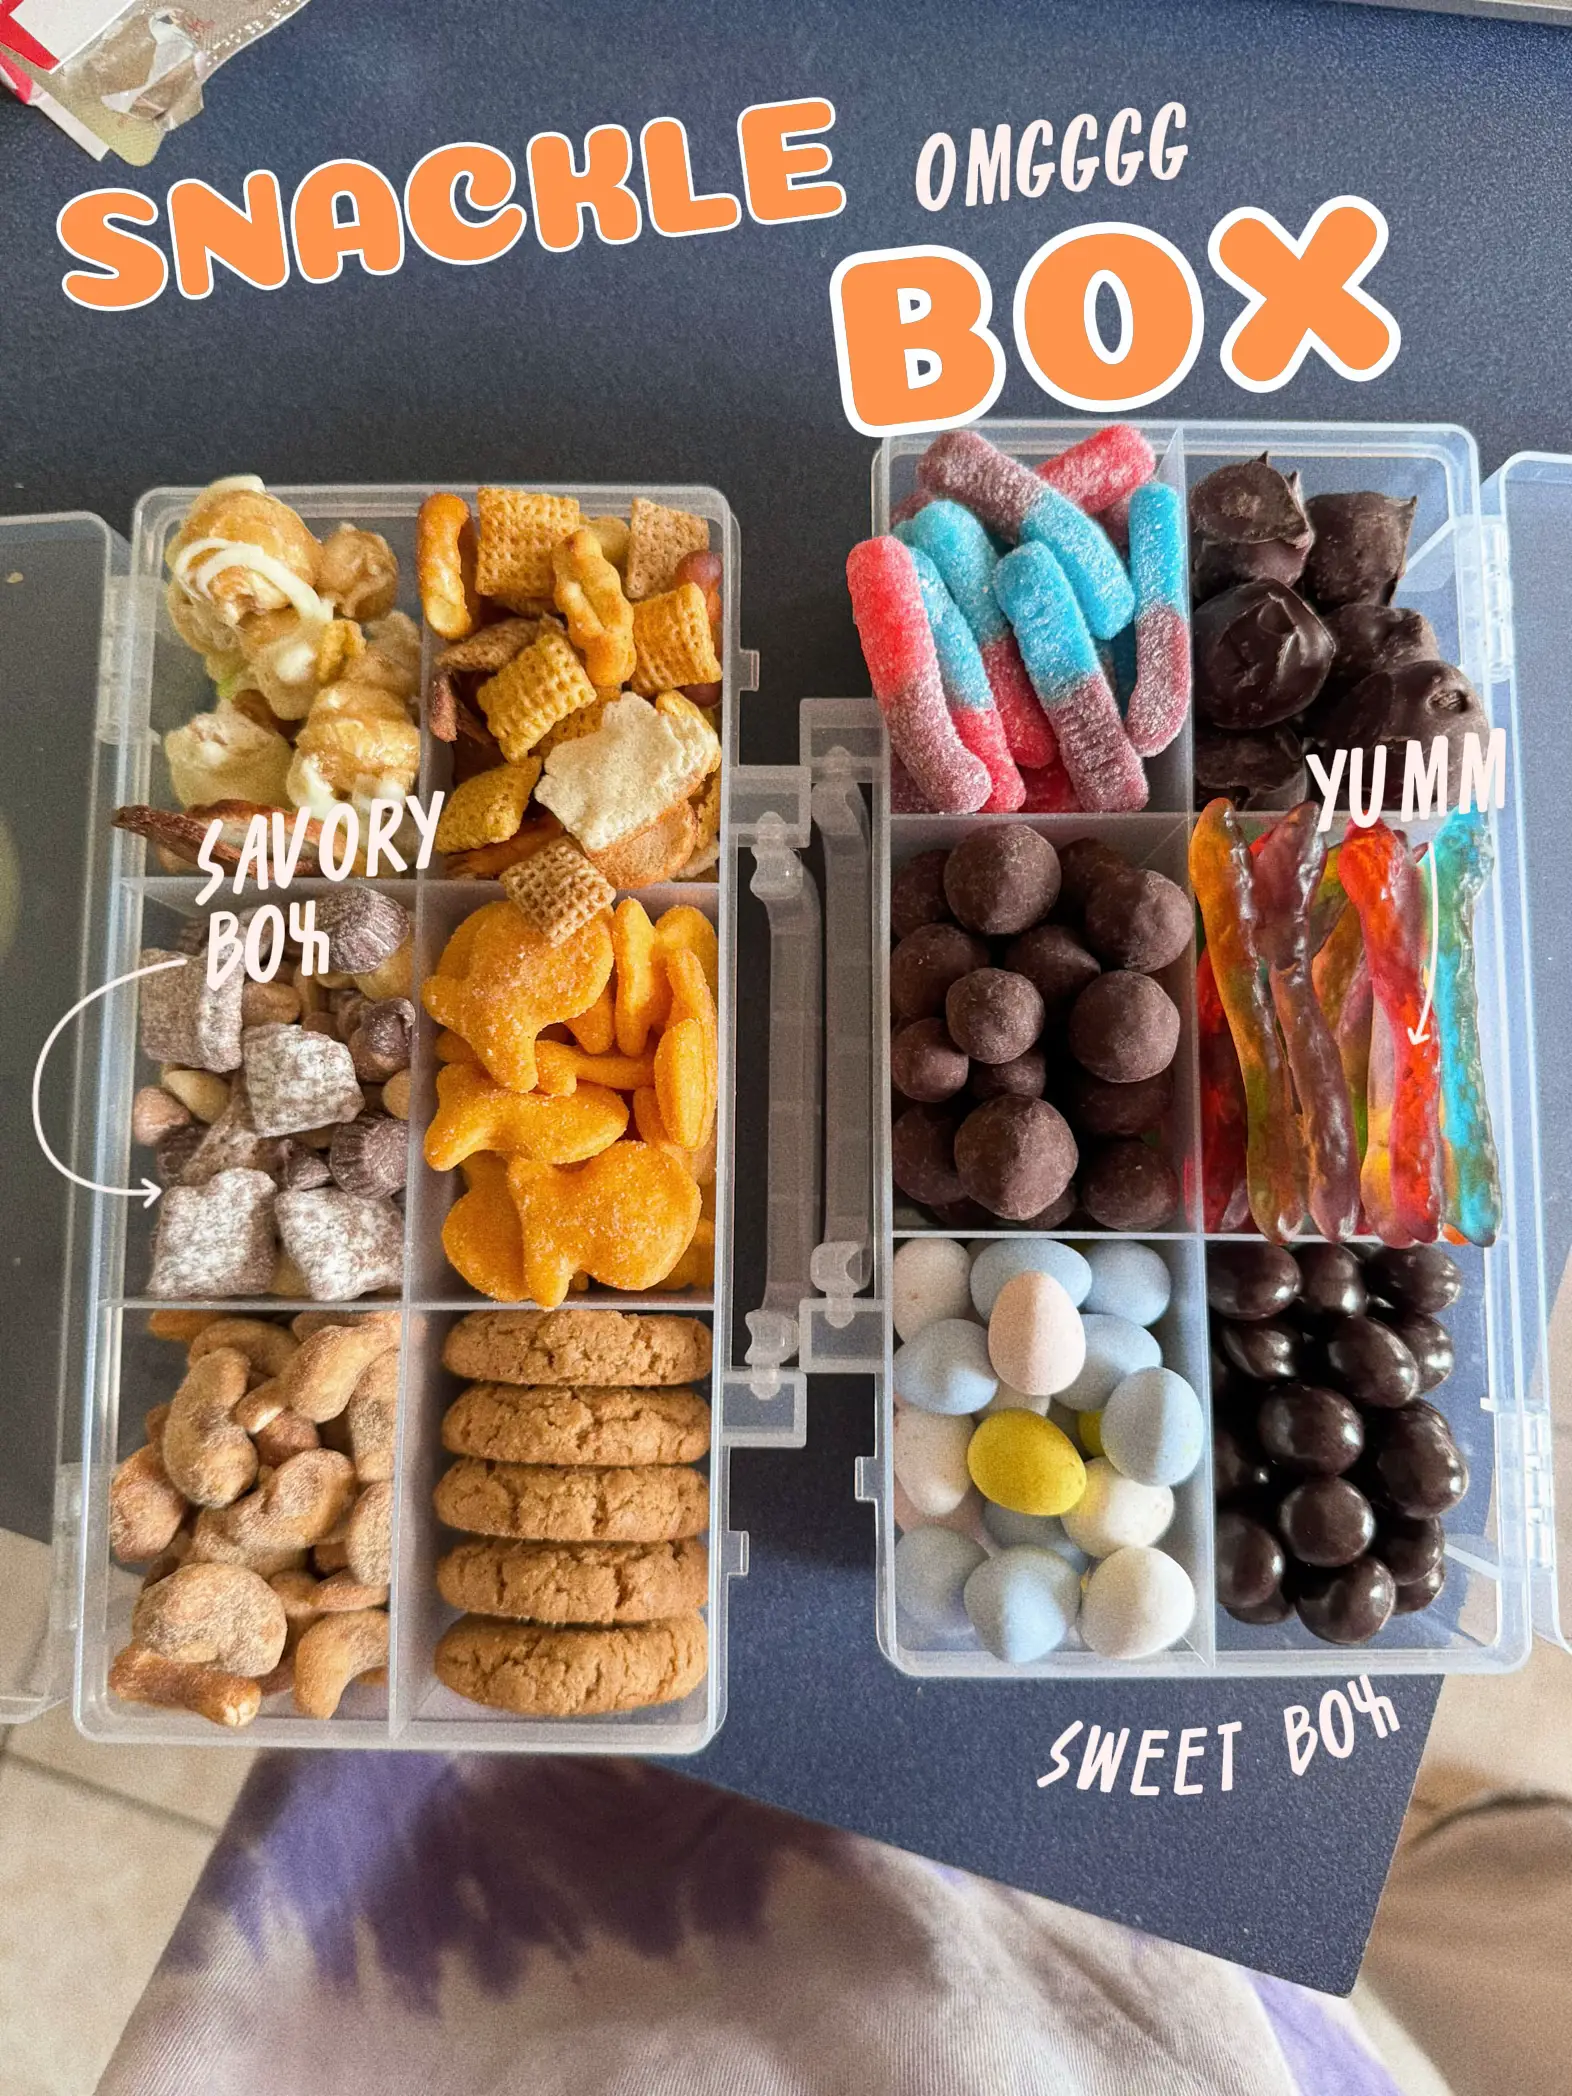 Snackle Box Other Uses - Lemon8 Search